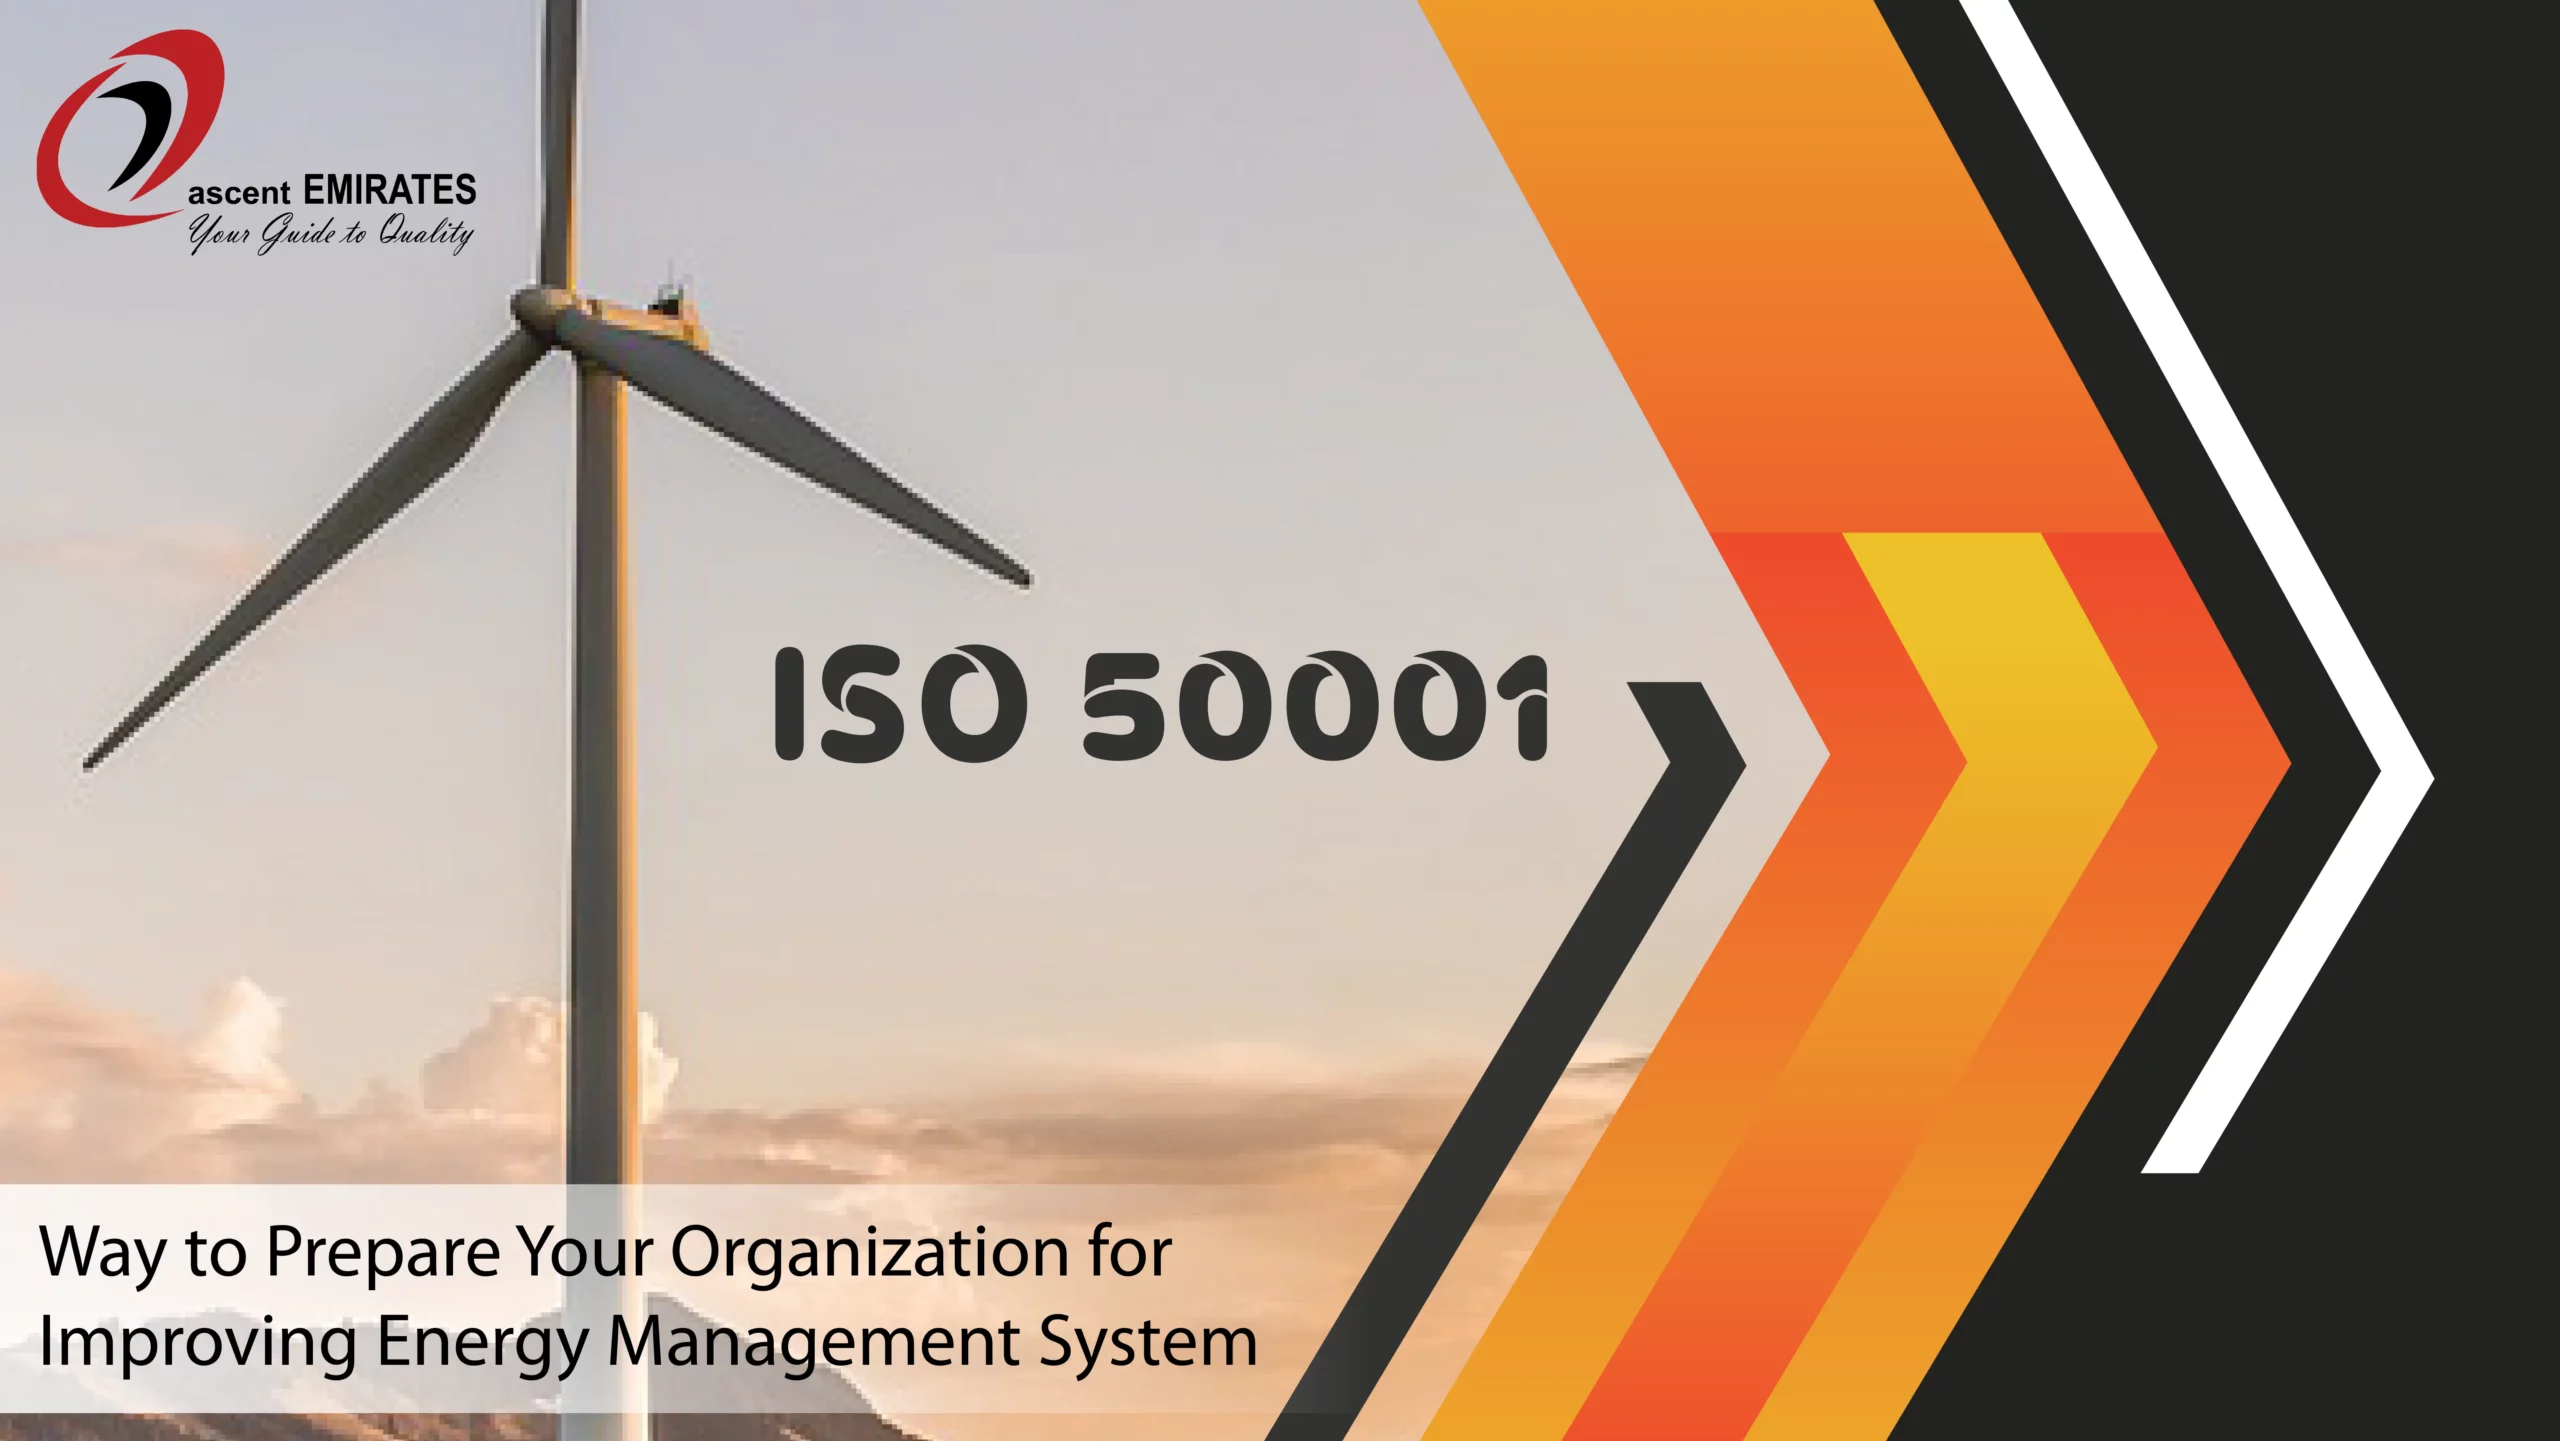 ISO 50001 Certification – Way to Prepare Your Organization for Improving Energy Management System